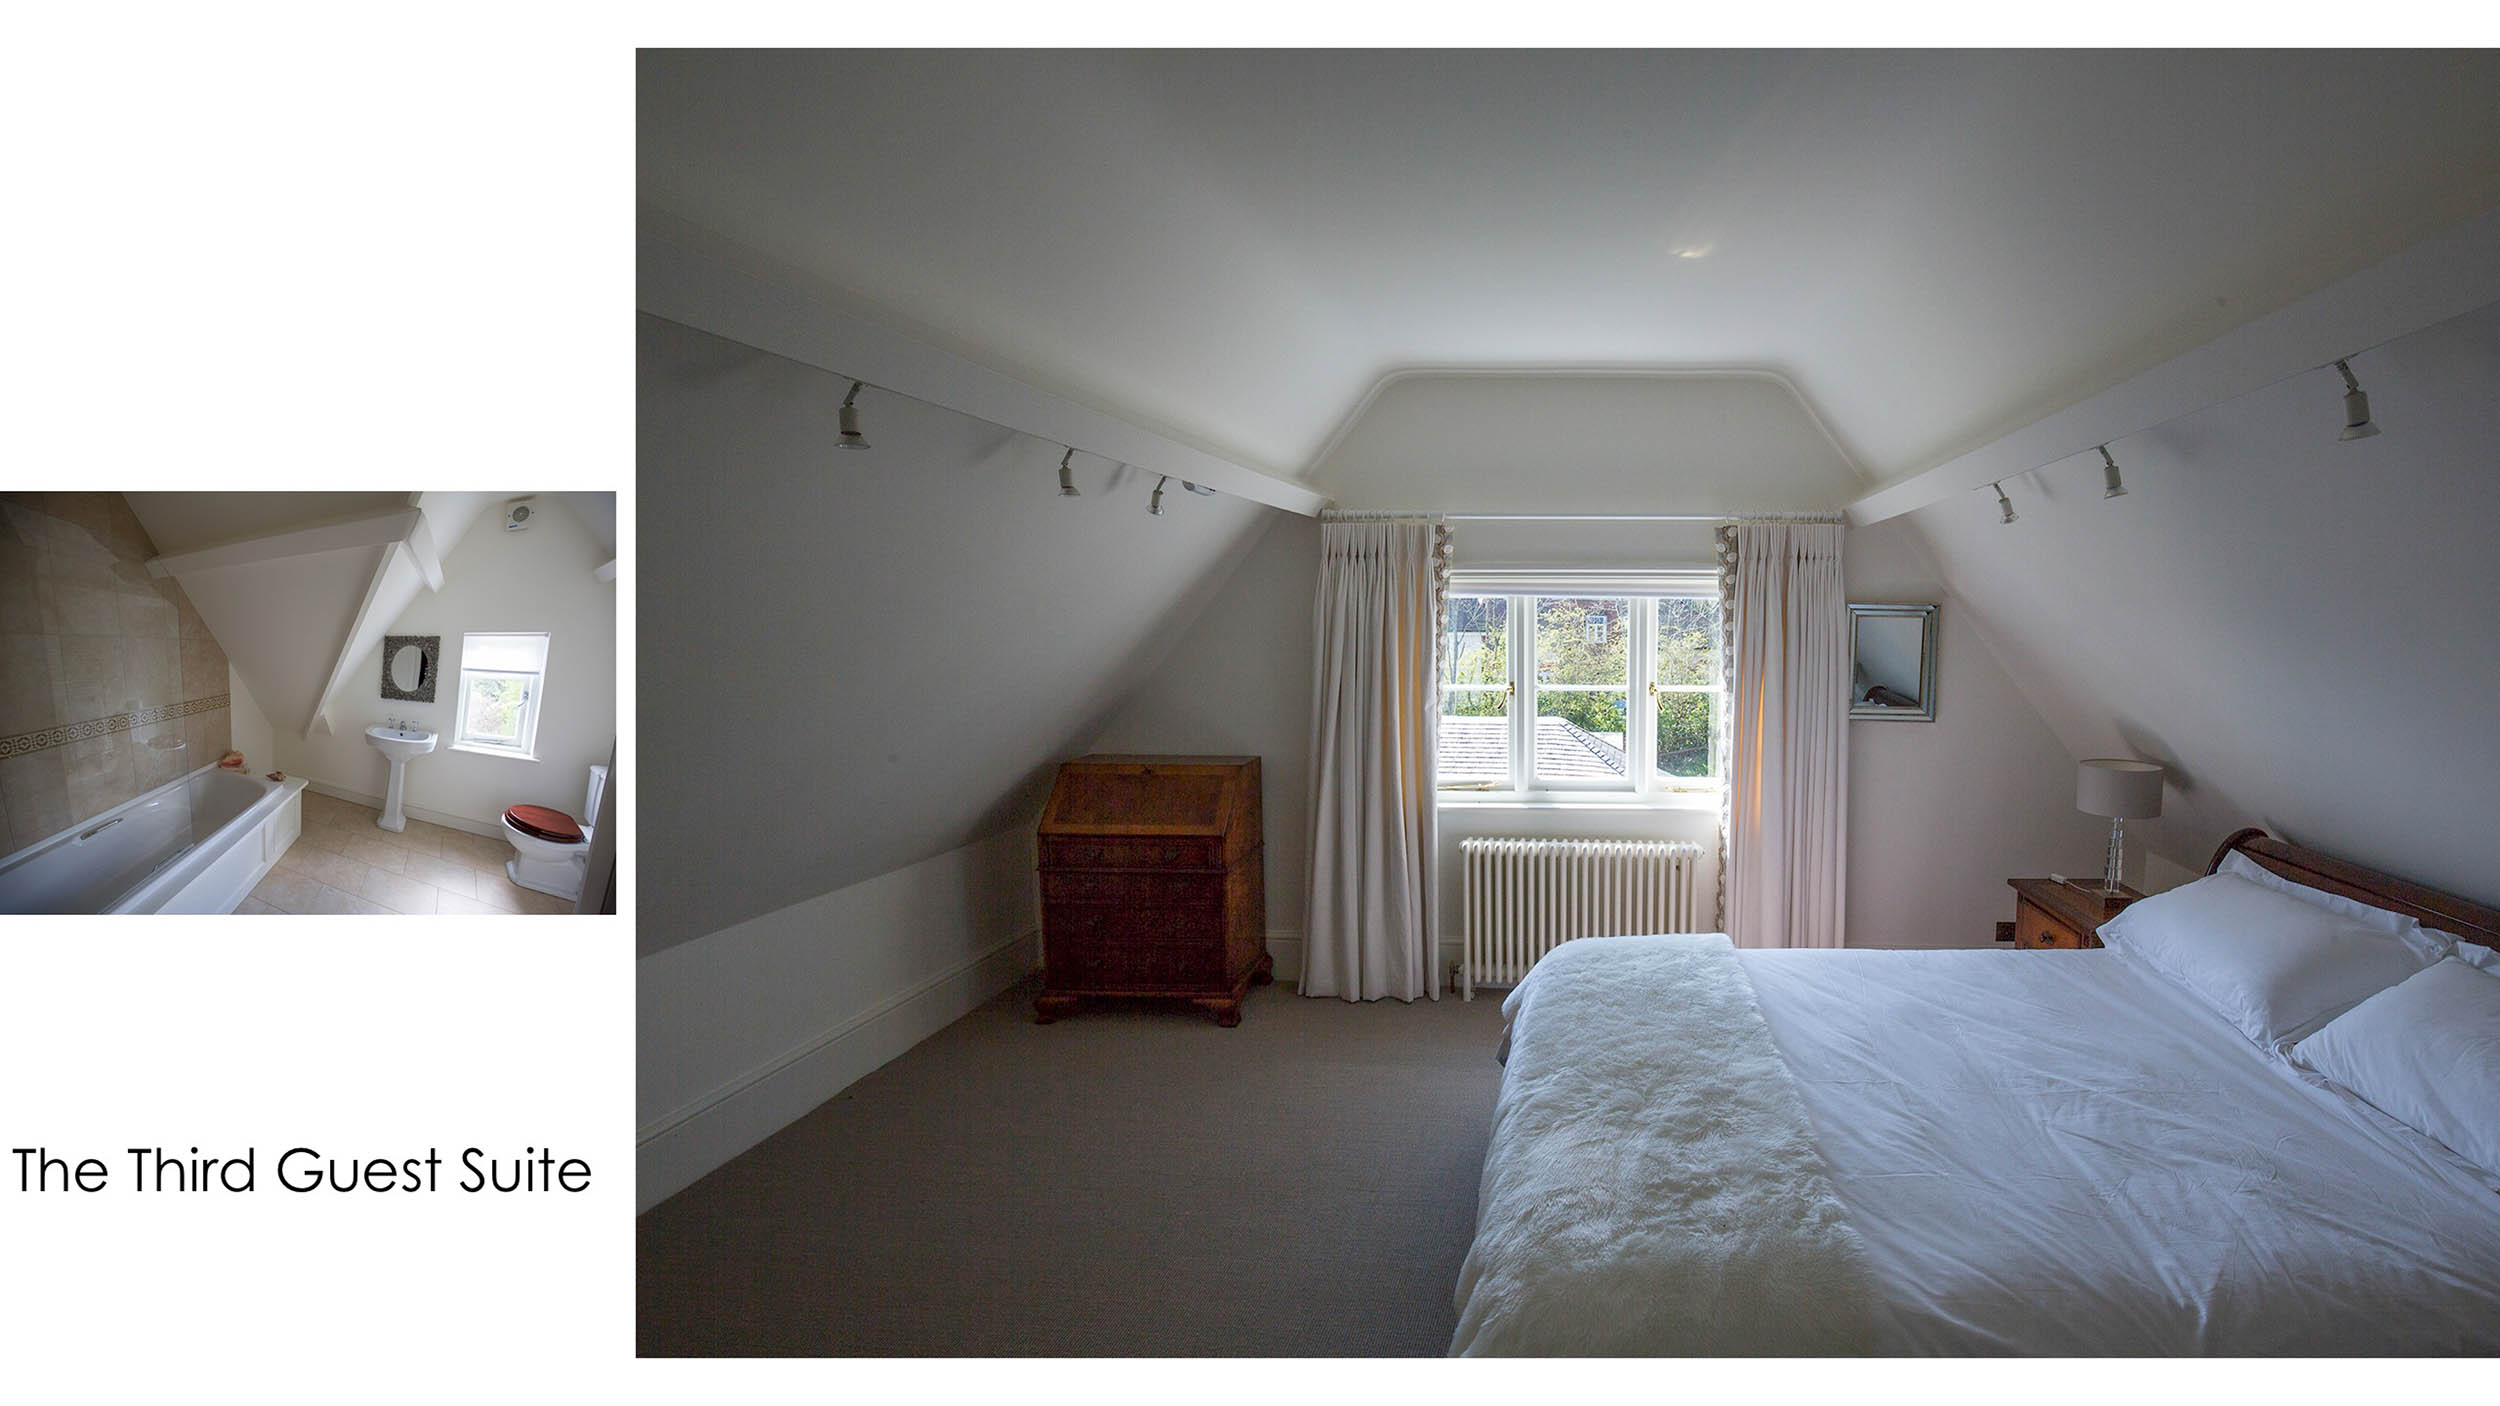 Guest Room - Pennybridge House - Real Estate Development Projects by Gabriella Atkinson.